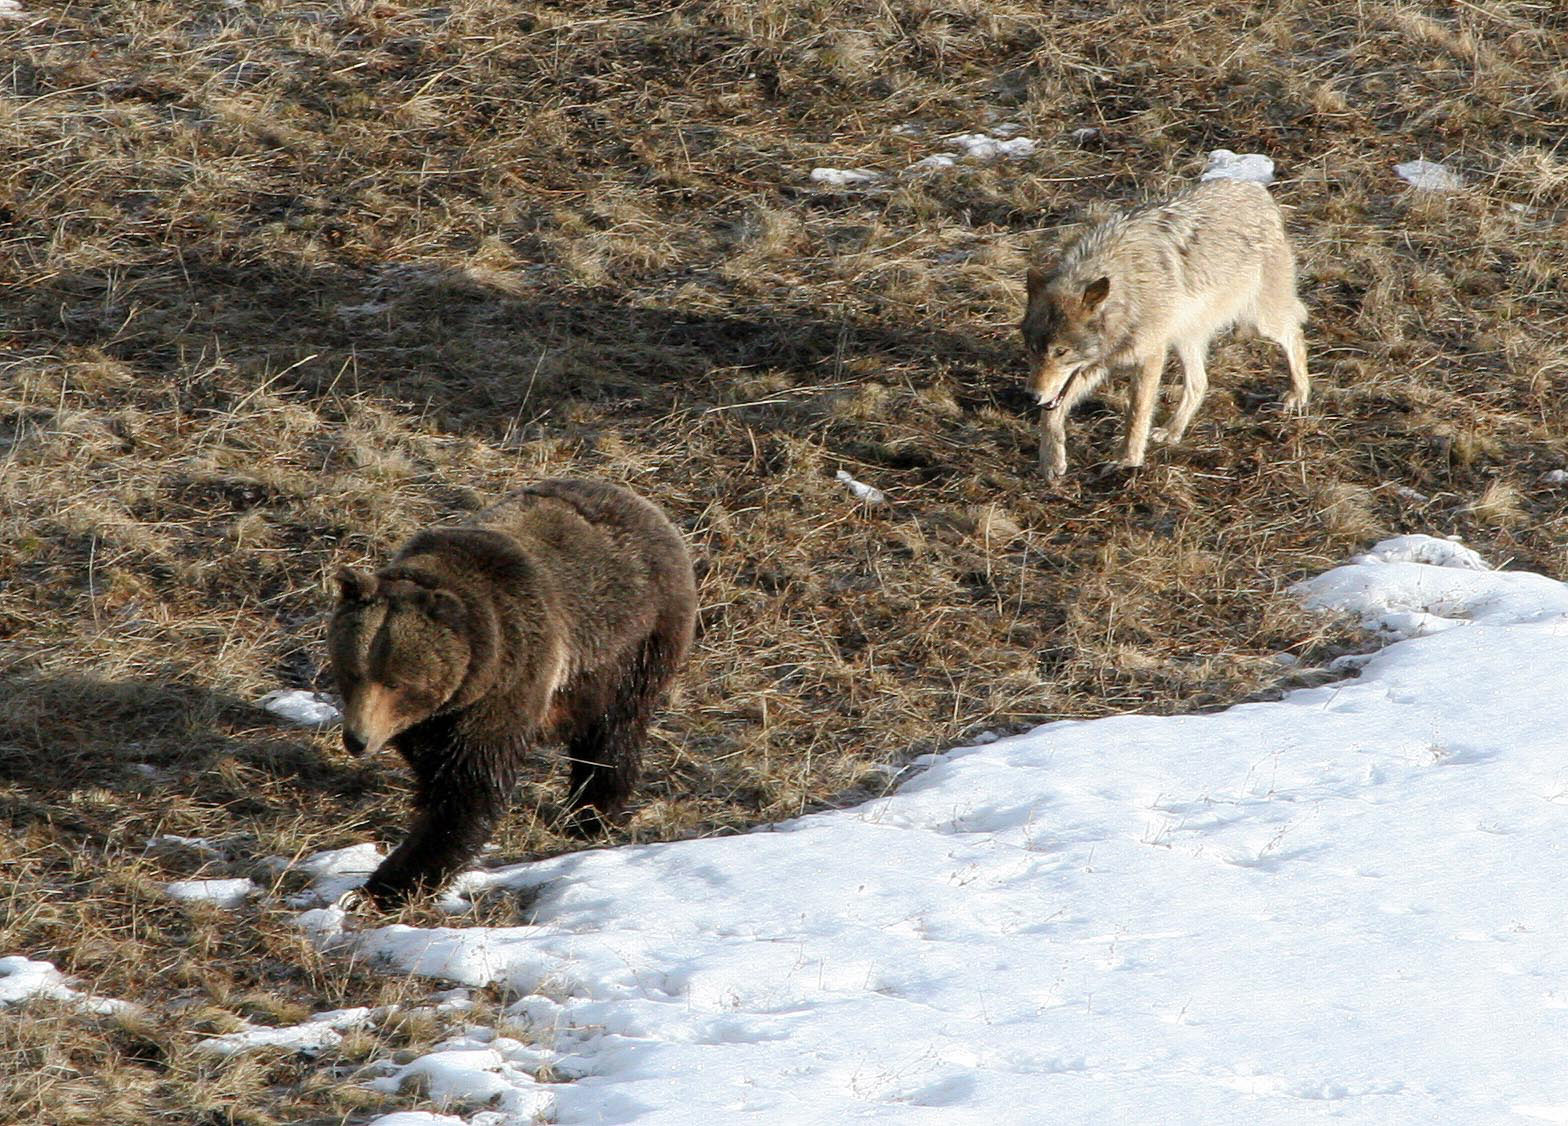 Federal Judge Restricts Wolf Trapping in Idaho to 'Protect' Grizzly Bears